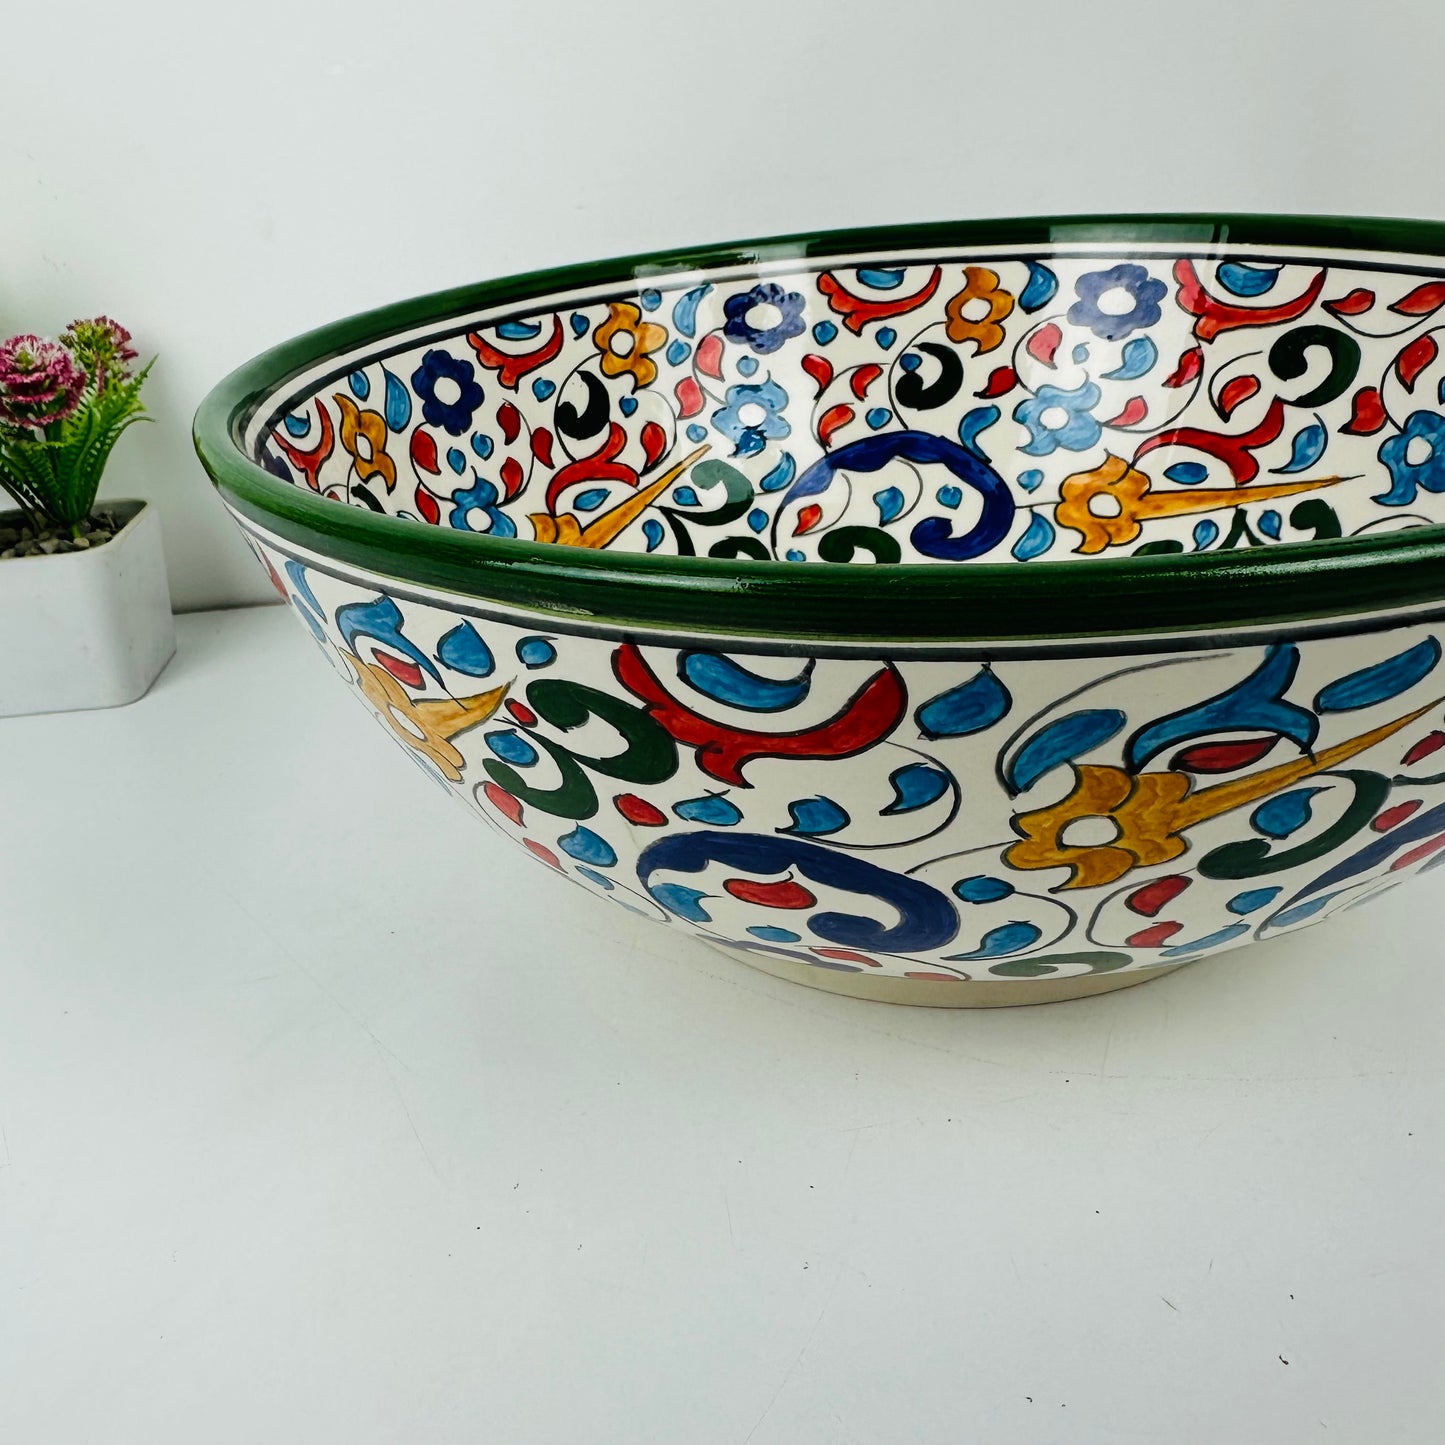 Enchanted Garden: Handcrafted Ceramic Sink with Flower Motifs and Green Finish